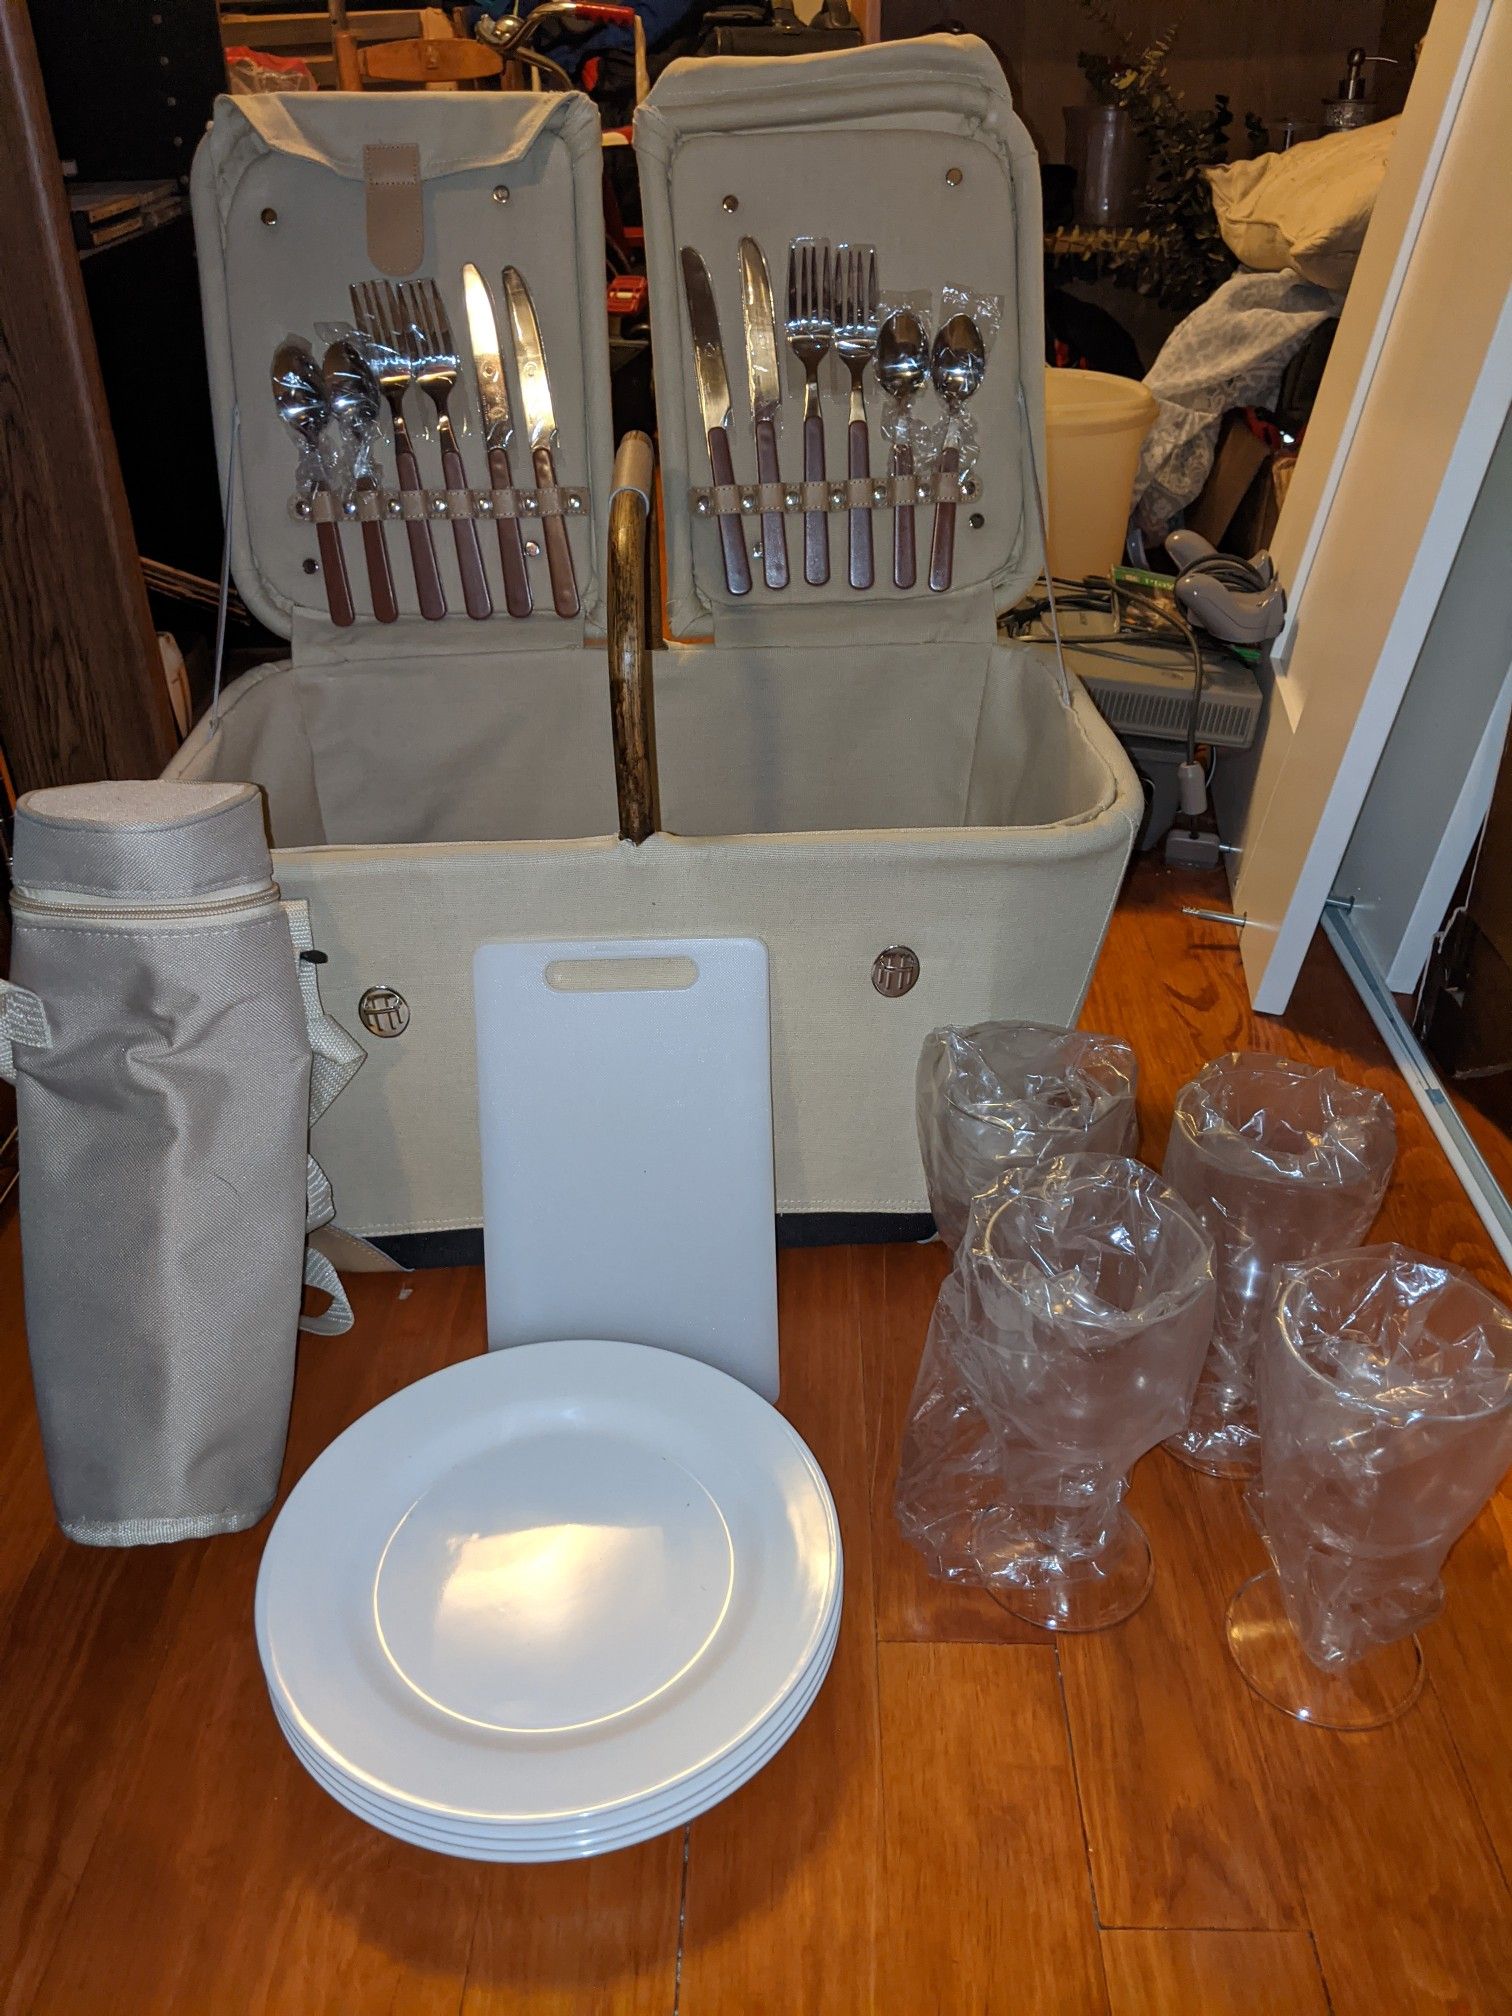 NEVER USED - Picnic Basket with Utensils, Plates, Cups, Cutting Board and Bottle Carrier